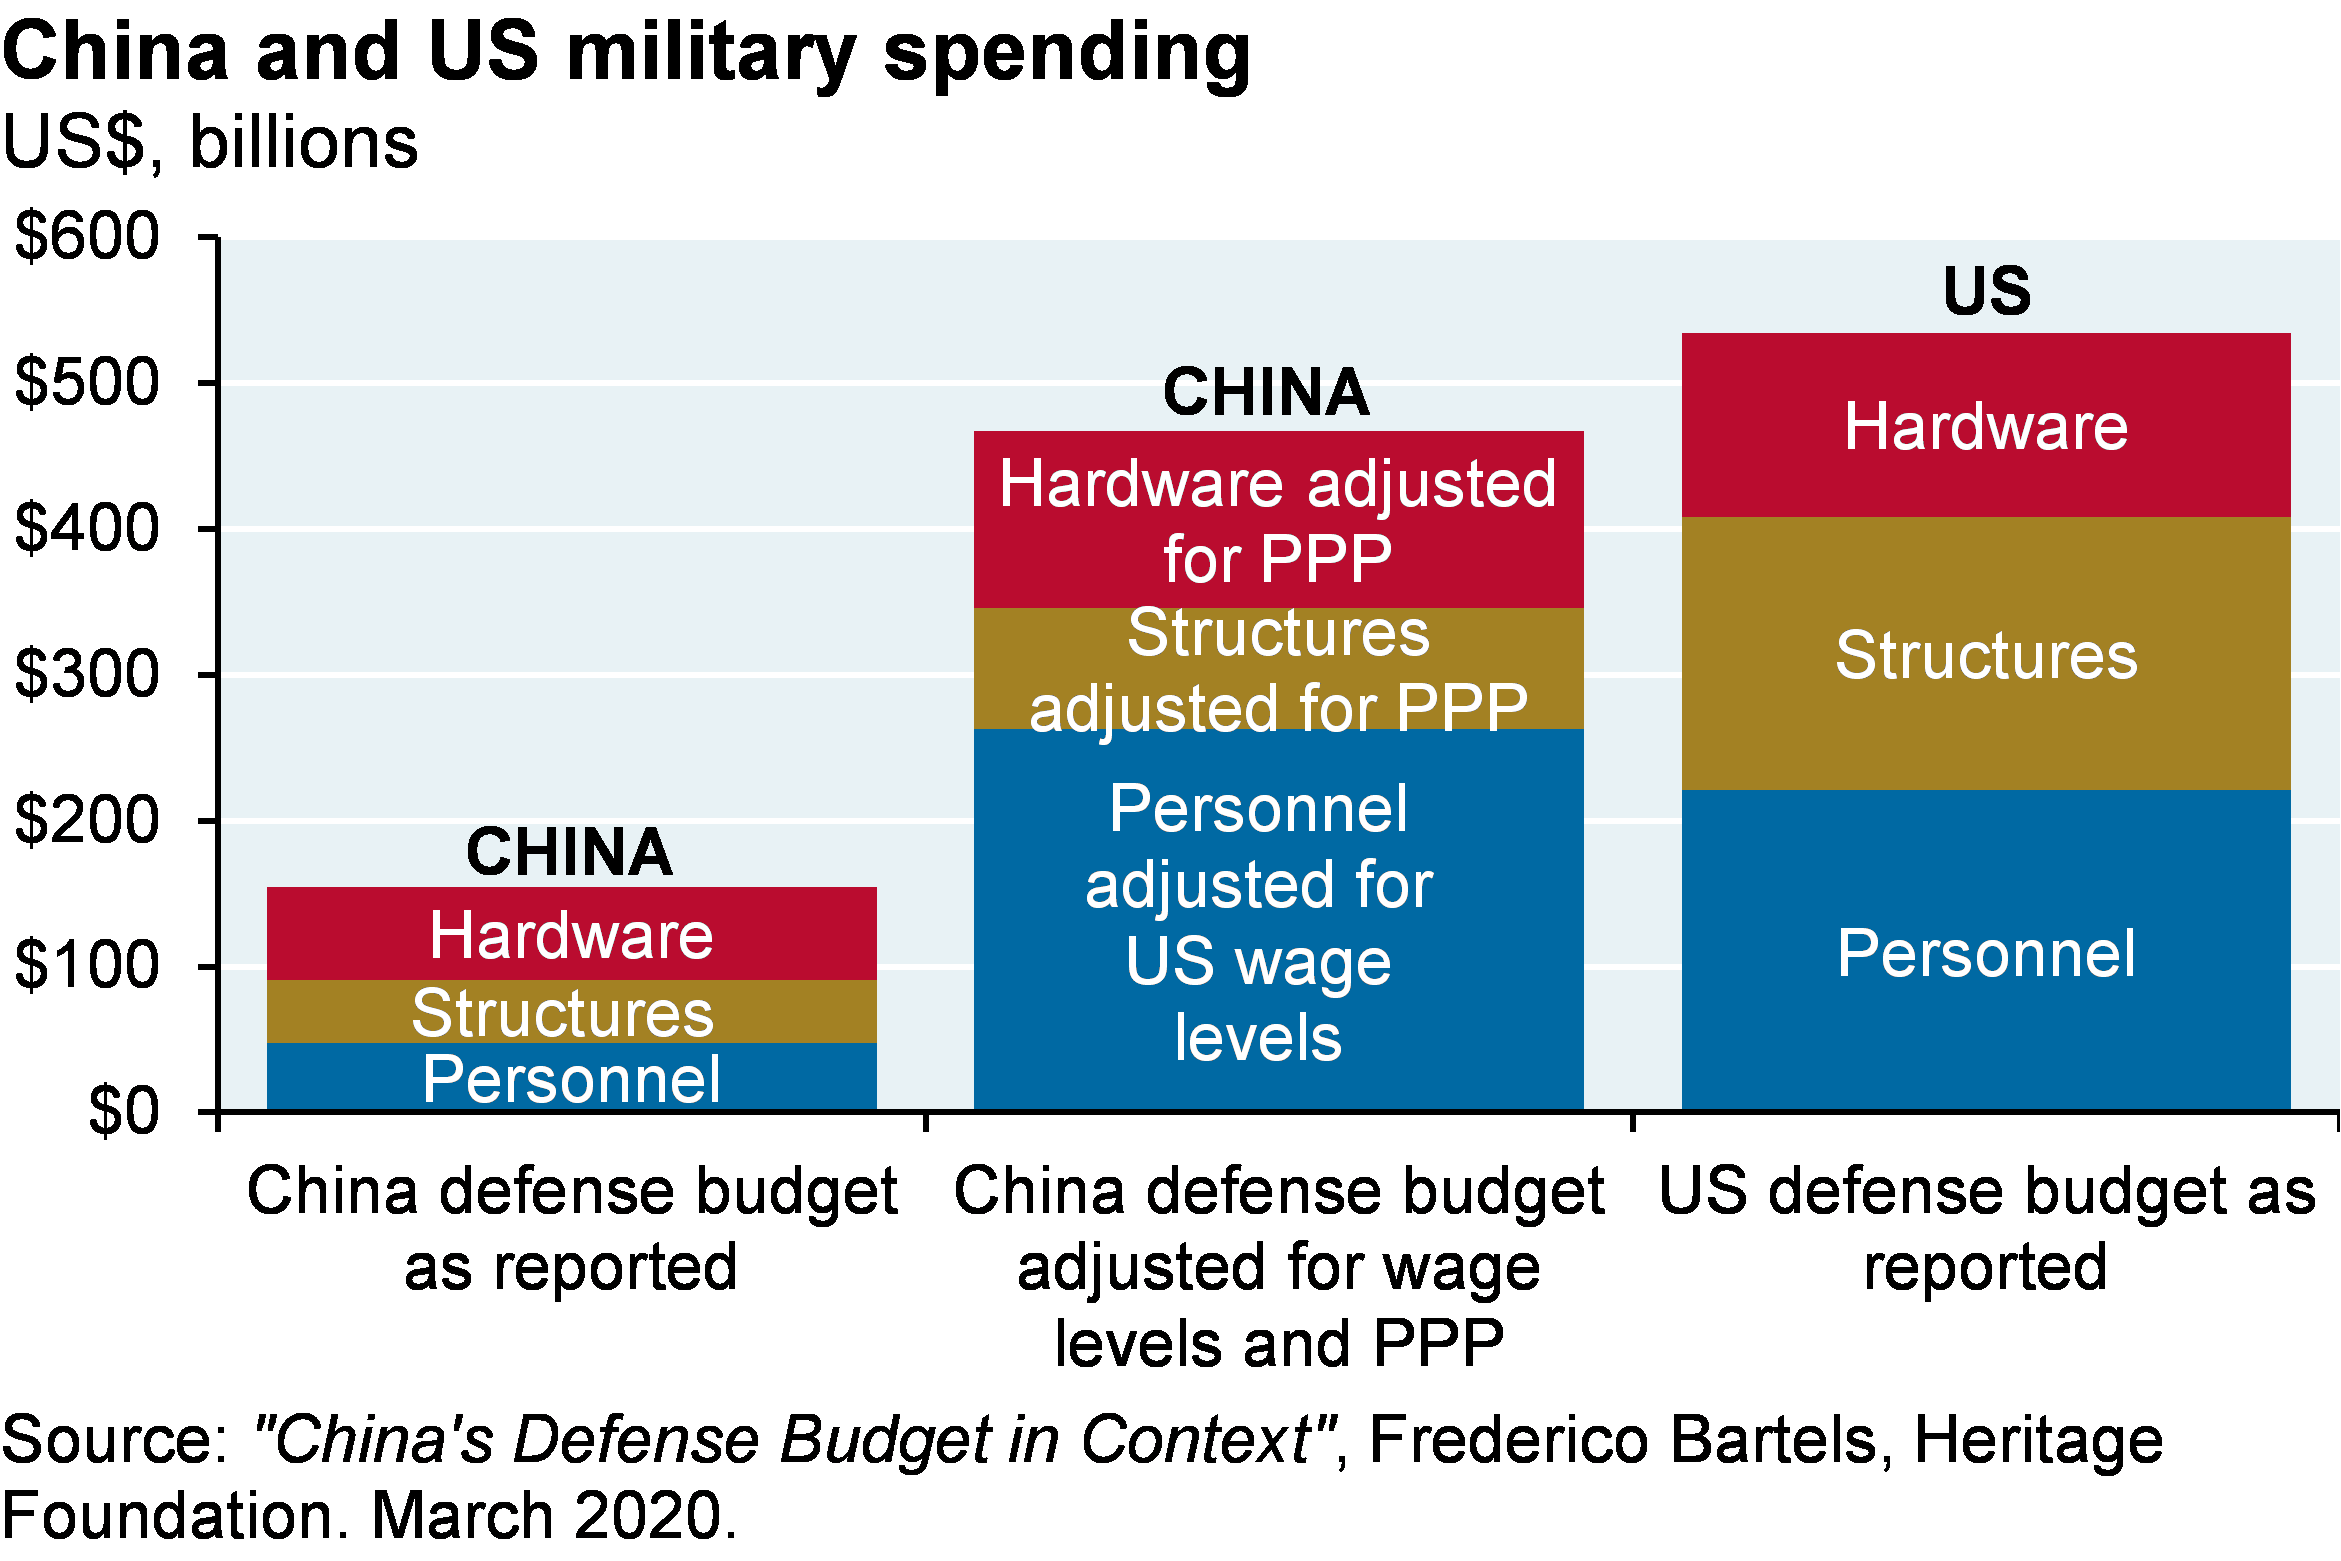 Stacked bar chart which shows China and US military spending broken out by category. The chart includes spending on hardware, structures and personnel. China’s defense budget as reported is around $150 billion, significantly lower than the US budget of $500 billion. However, after adjusting China’s defense budget for PPP and US wage levels the budget is closer to $475 billion.